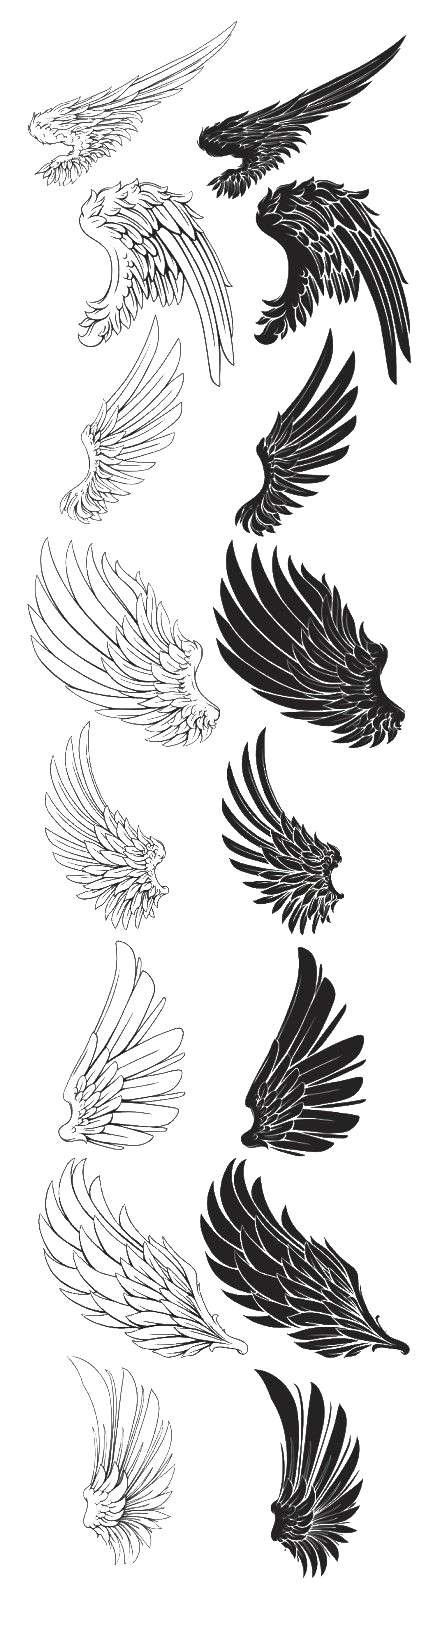 Eagle Feather Drawing Wings Brush Free Download PNG HQ PNG Image